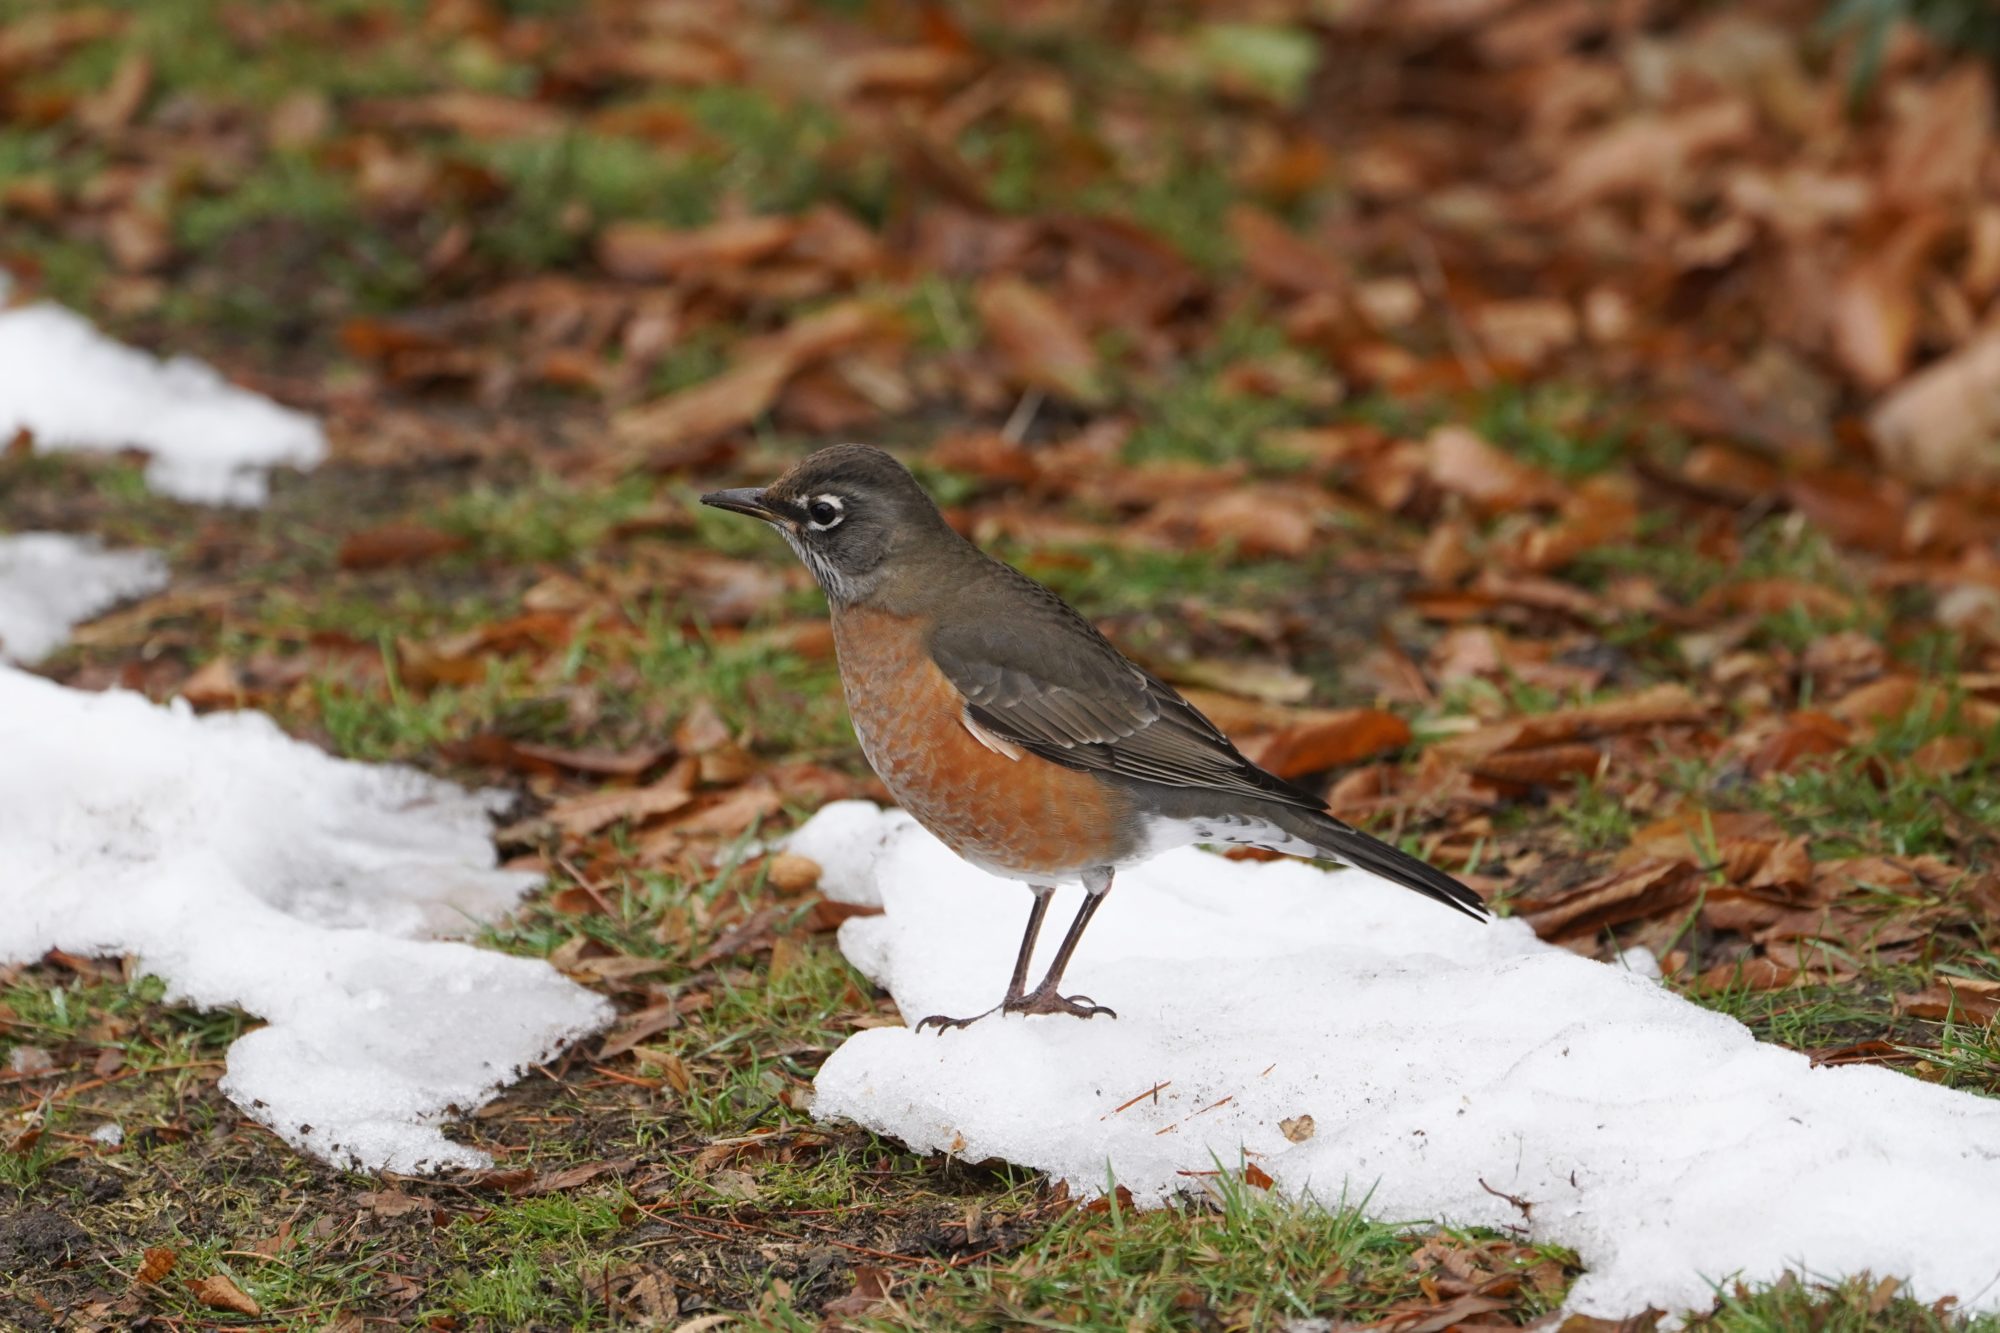 American Robin in the snow